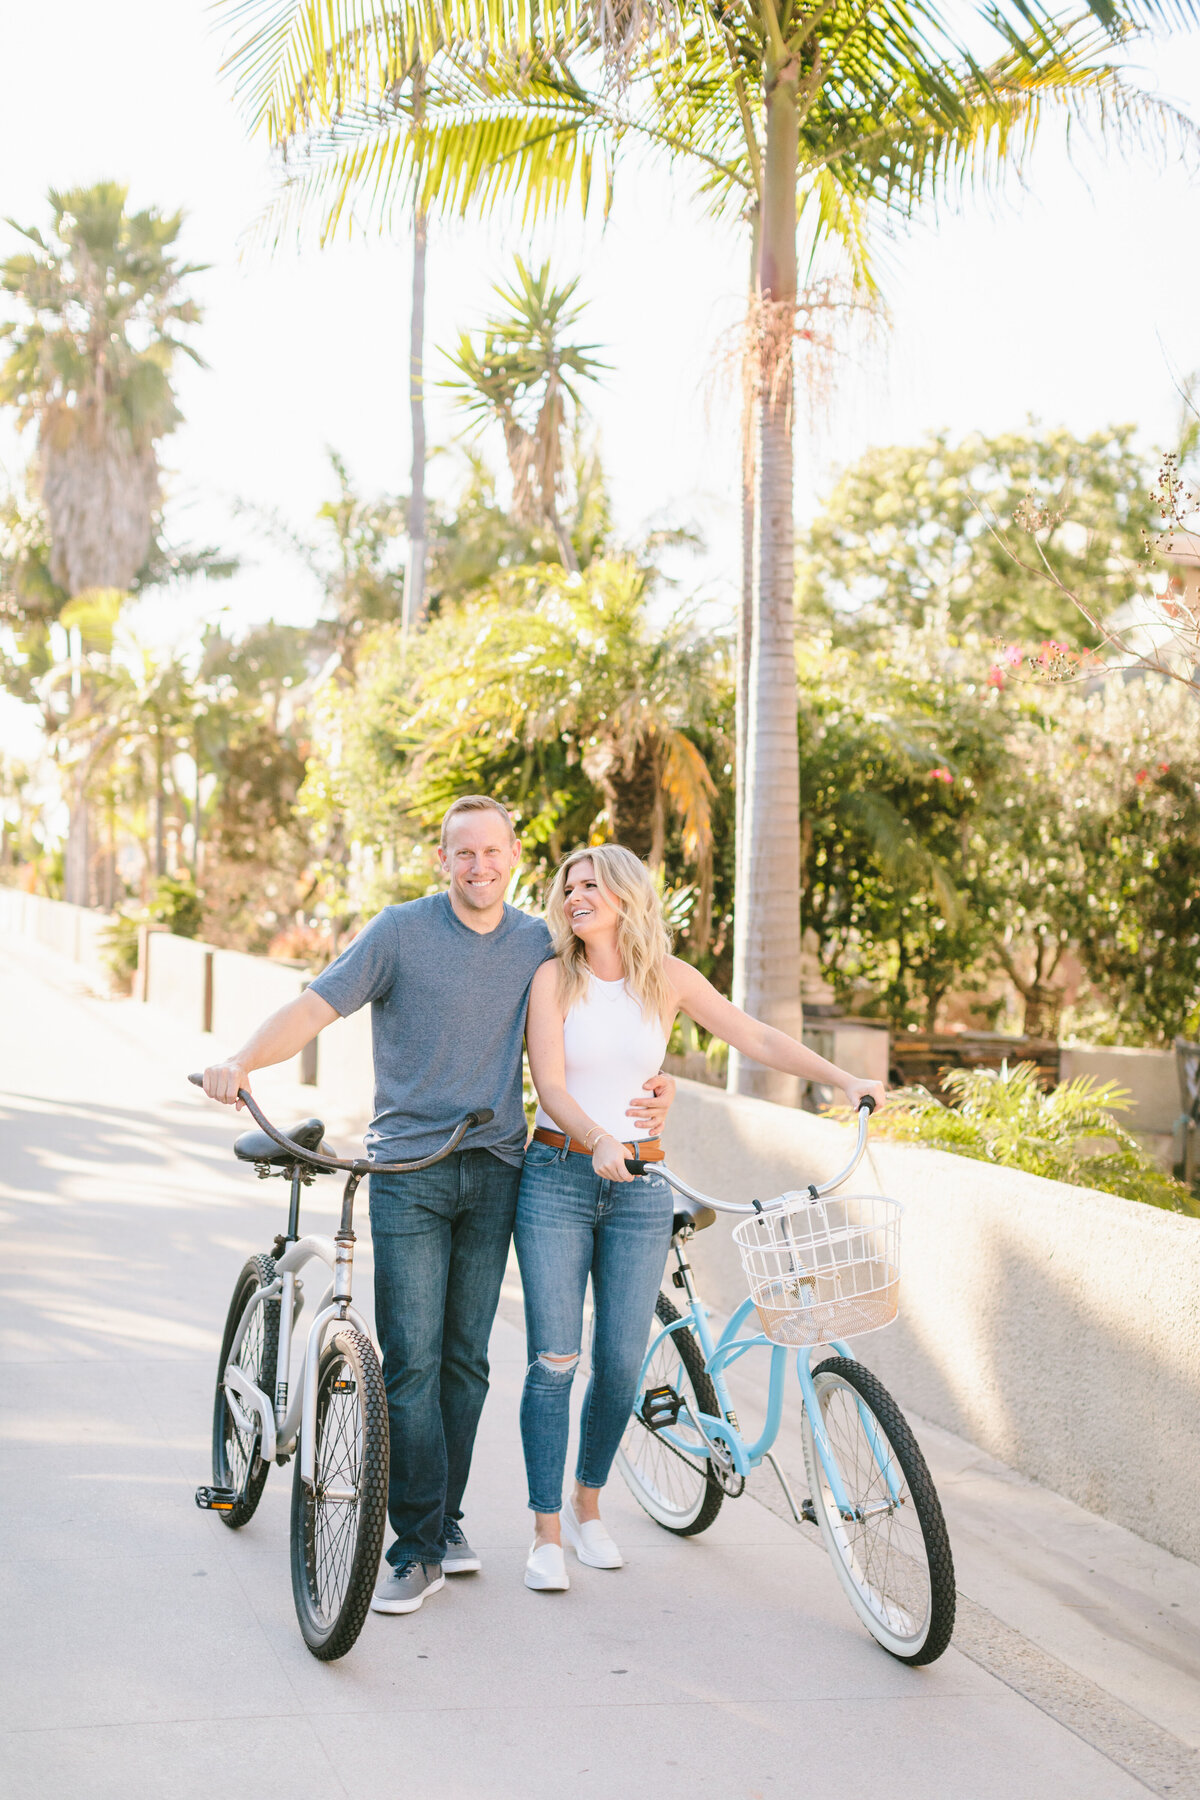 Best California and Texas Engagement Photographer-Jodee Debes Photography-254